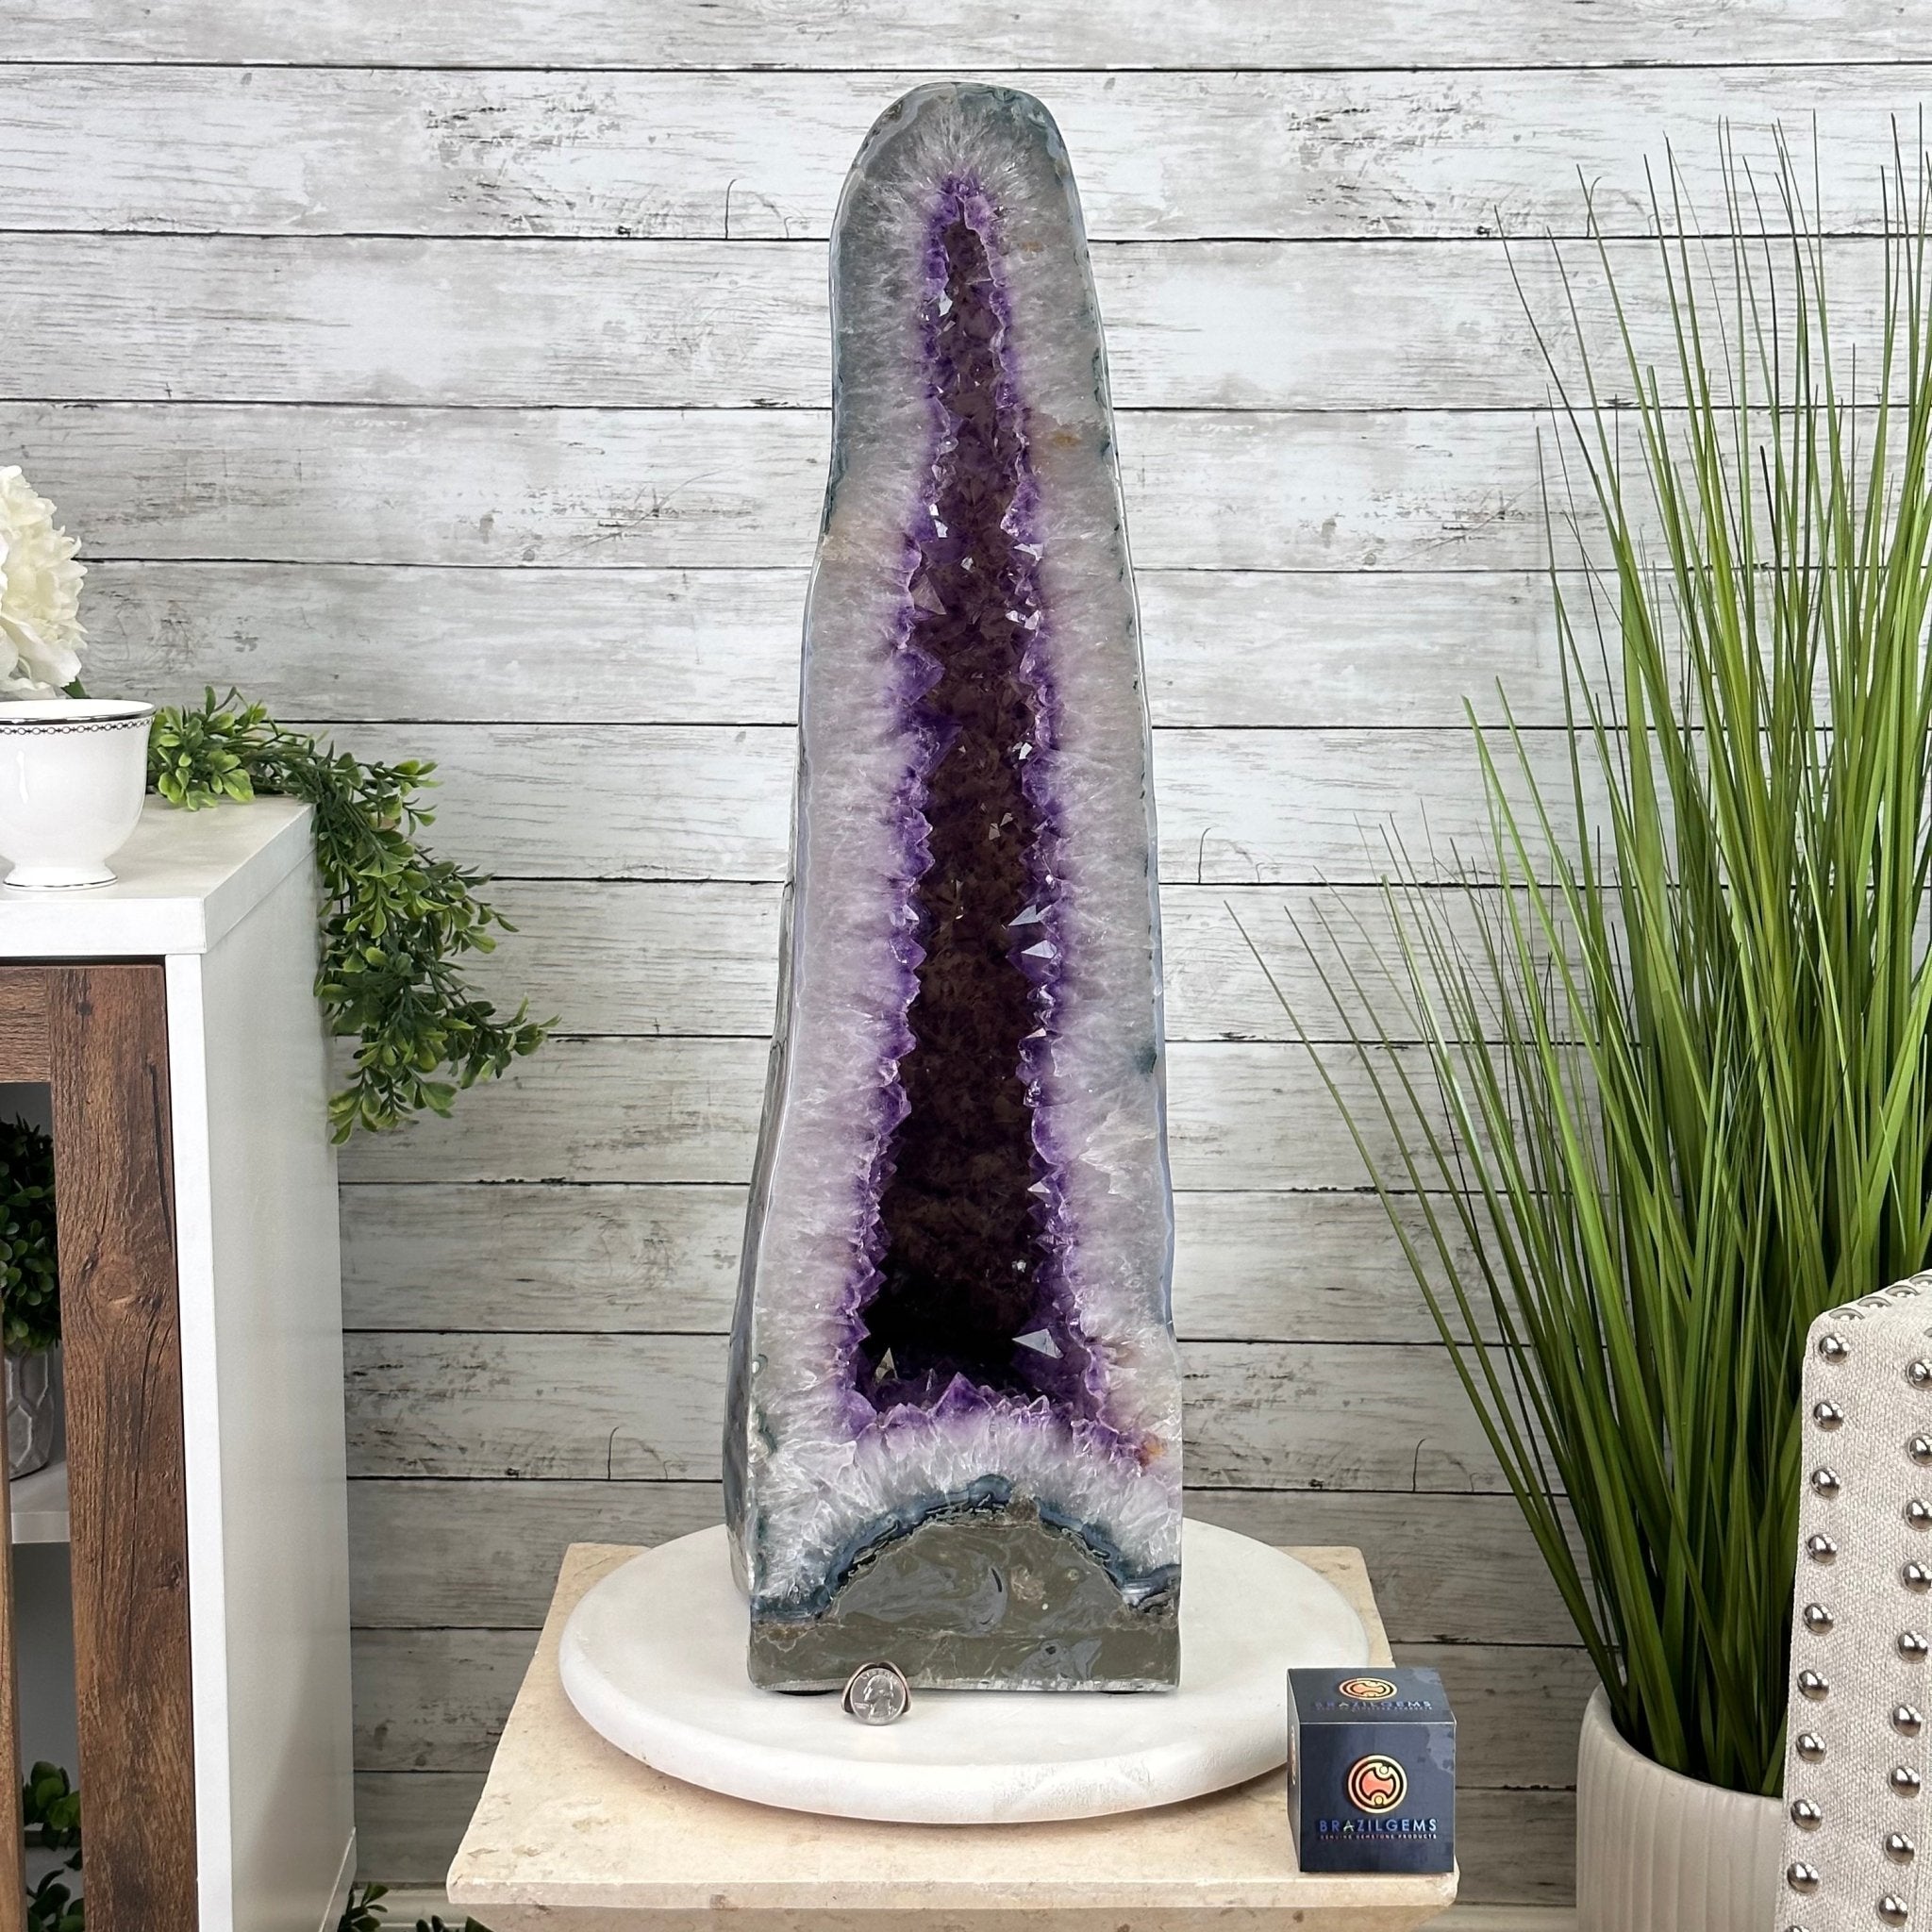 Extra Plus Quality Polished Brazilian Amethyst Cathedral, 69.6 lbs & 27.3" tall Model #5602-0120 by Brazil Gems - Brazil GemsBrazil GemsExtra Plus Quality Polished Brazilian Amethyst Cathedral, 69.6 lbs & 27.3" tall Model #5602-0120 by Brazil GemsPolished Cathedrals5602-0120